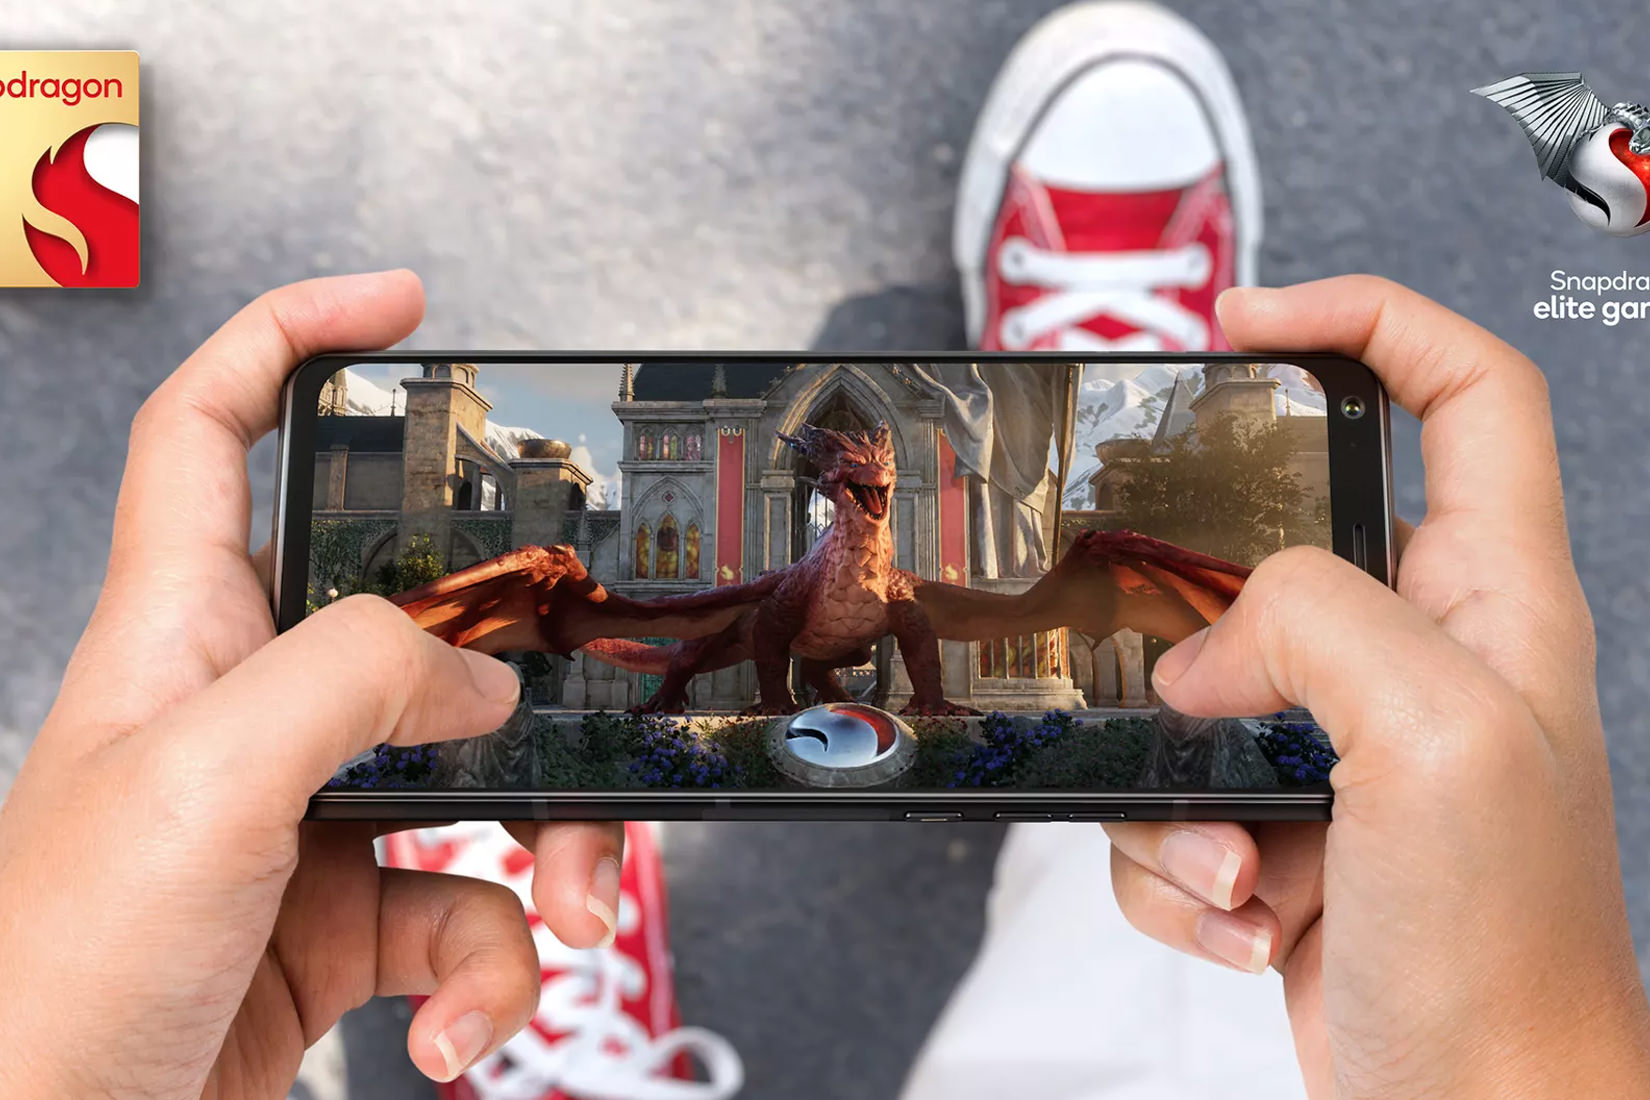 Gaming experience on a phone equipped with Qualcomm Snapdragon 8 generation 2 processor